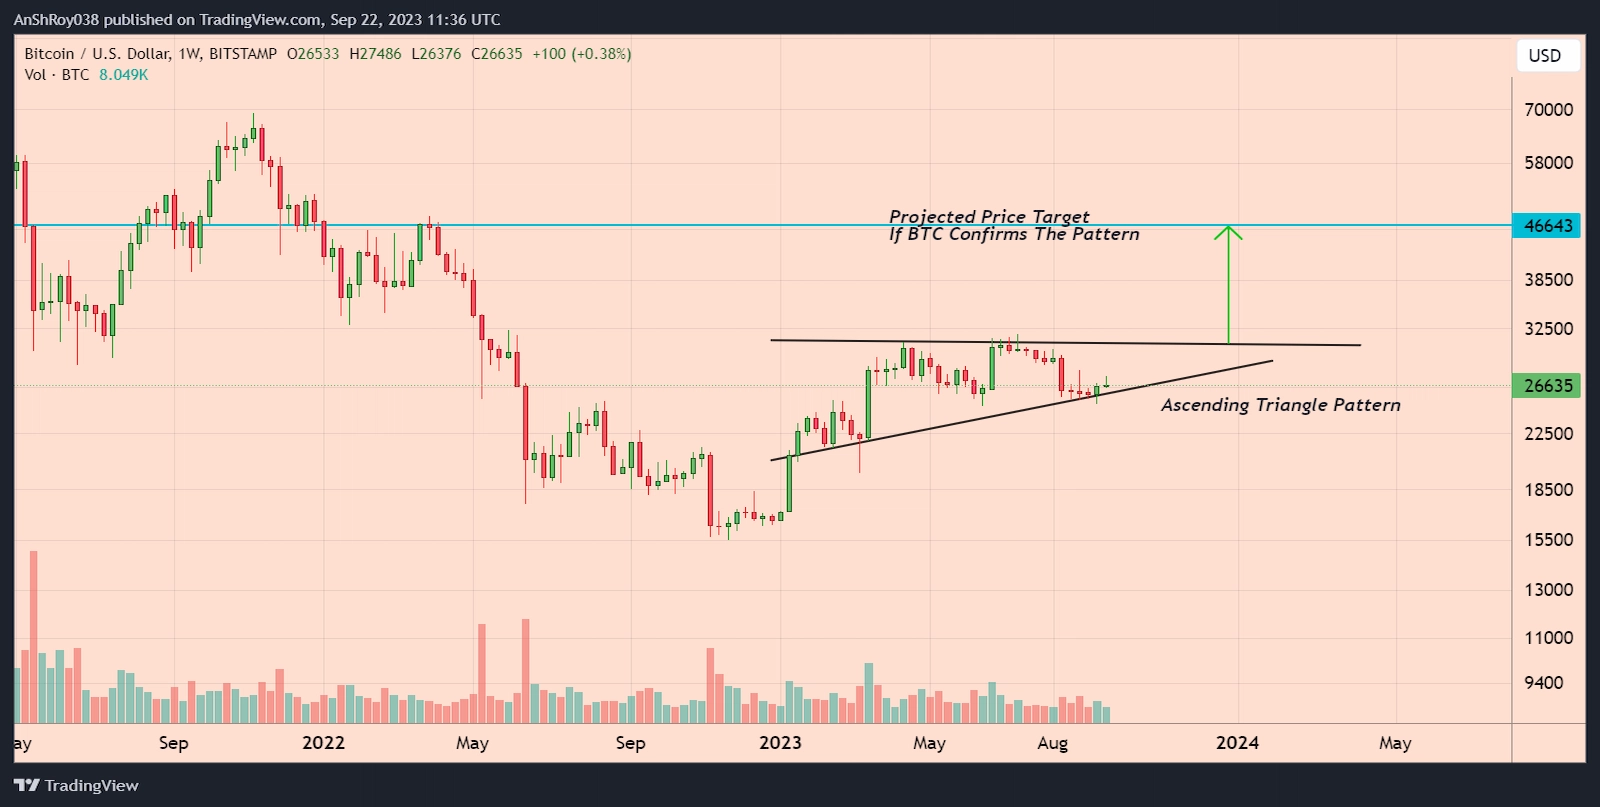 BTC price formed bullish pattern with a 75%+ price target. 